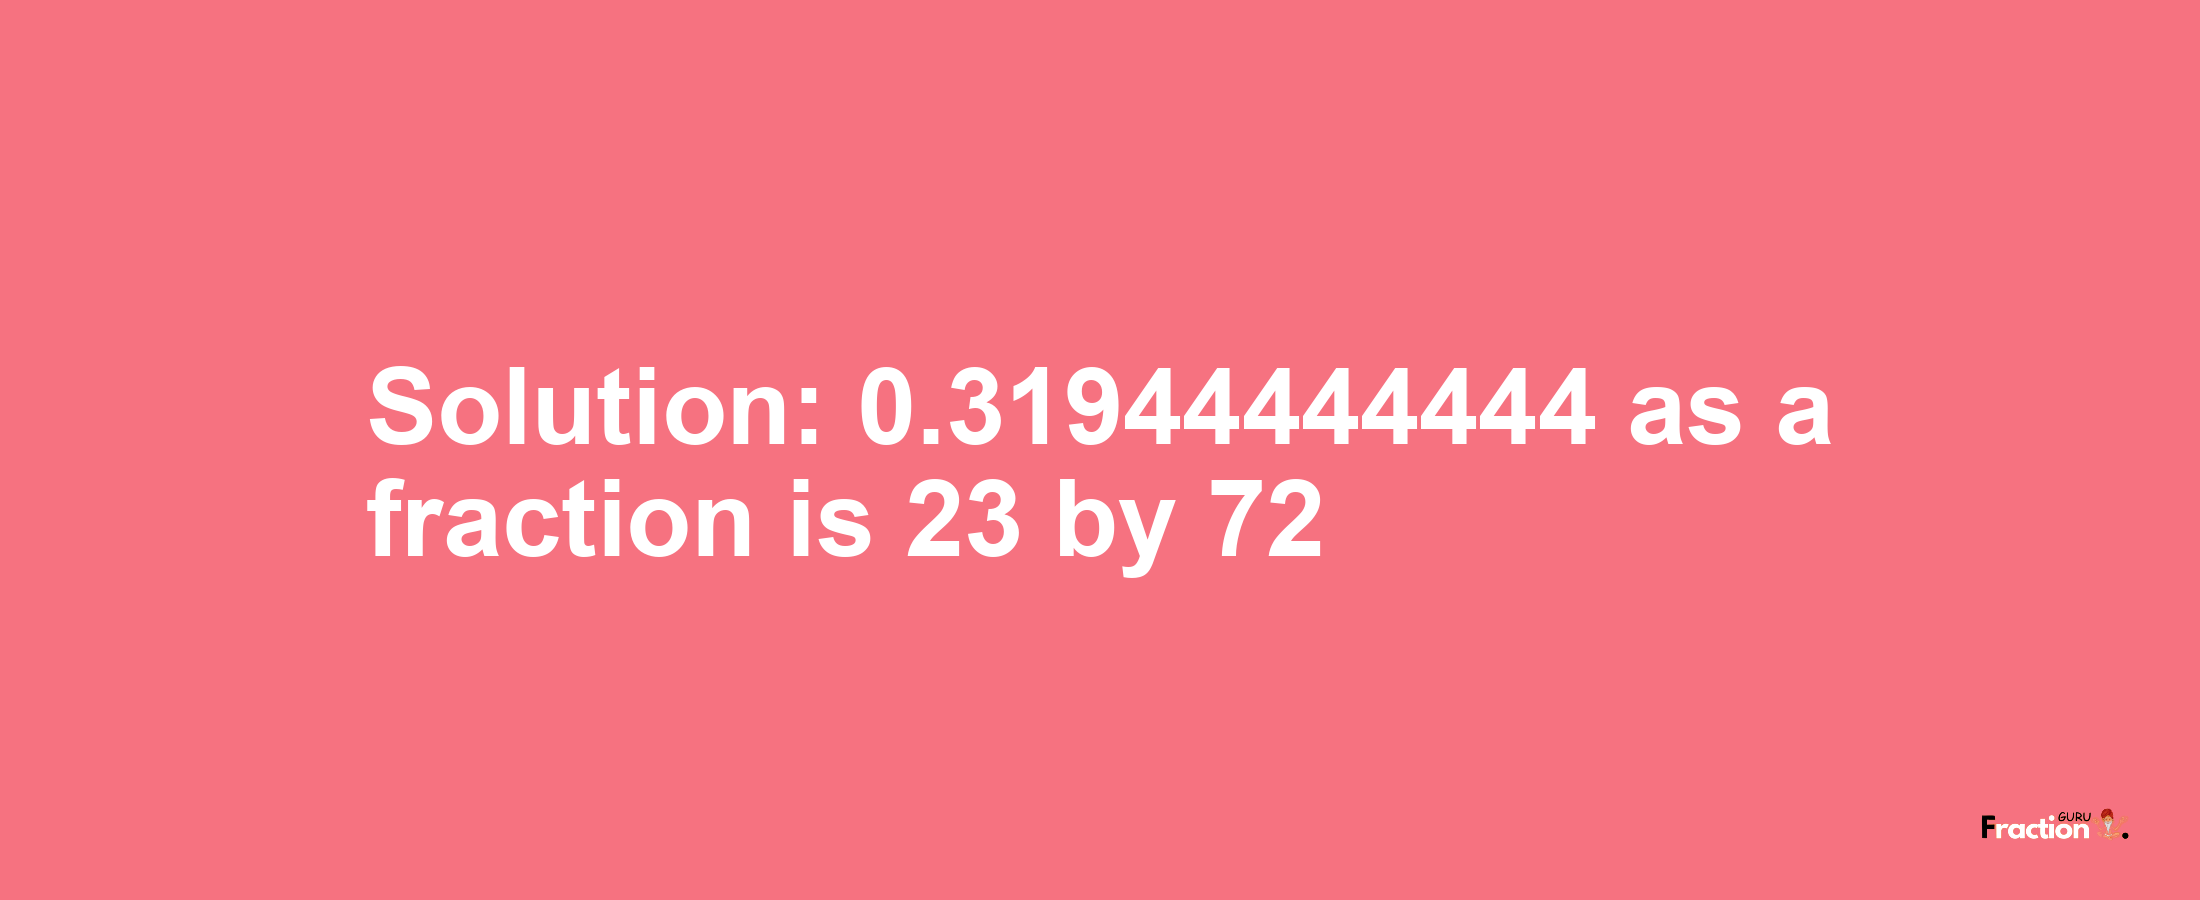 Solution:0.31944444444 as a fraction is 23/72